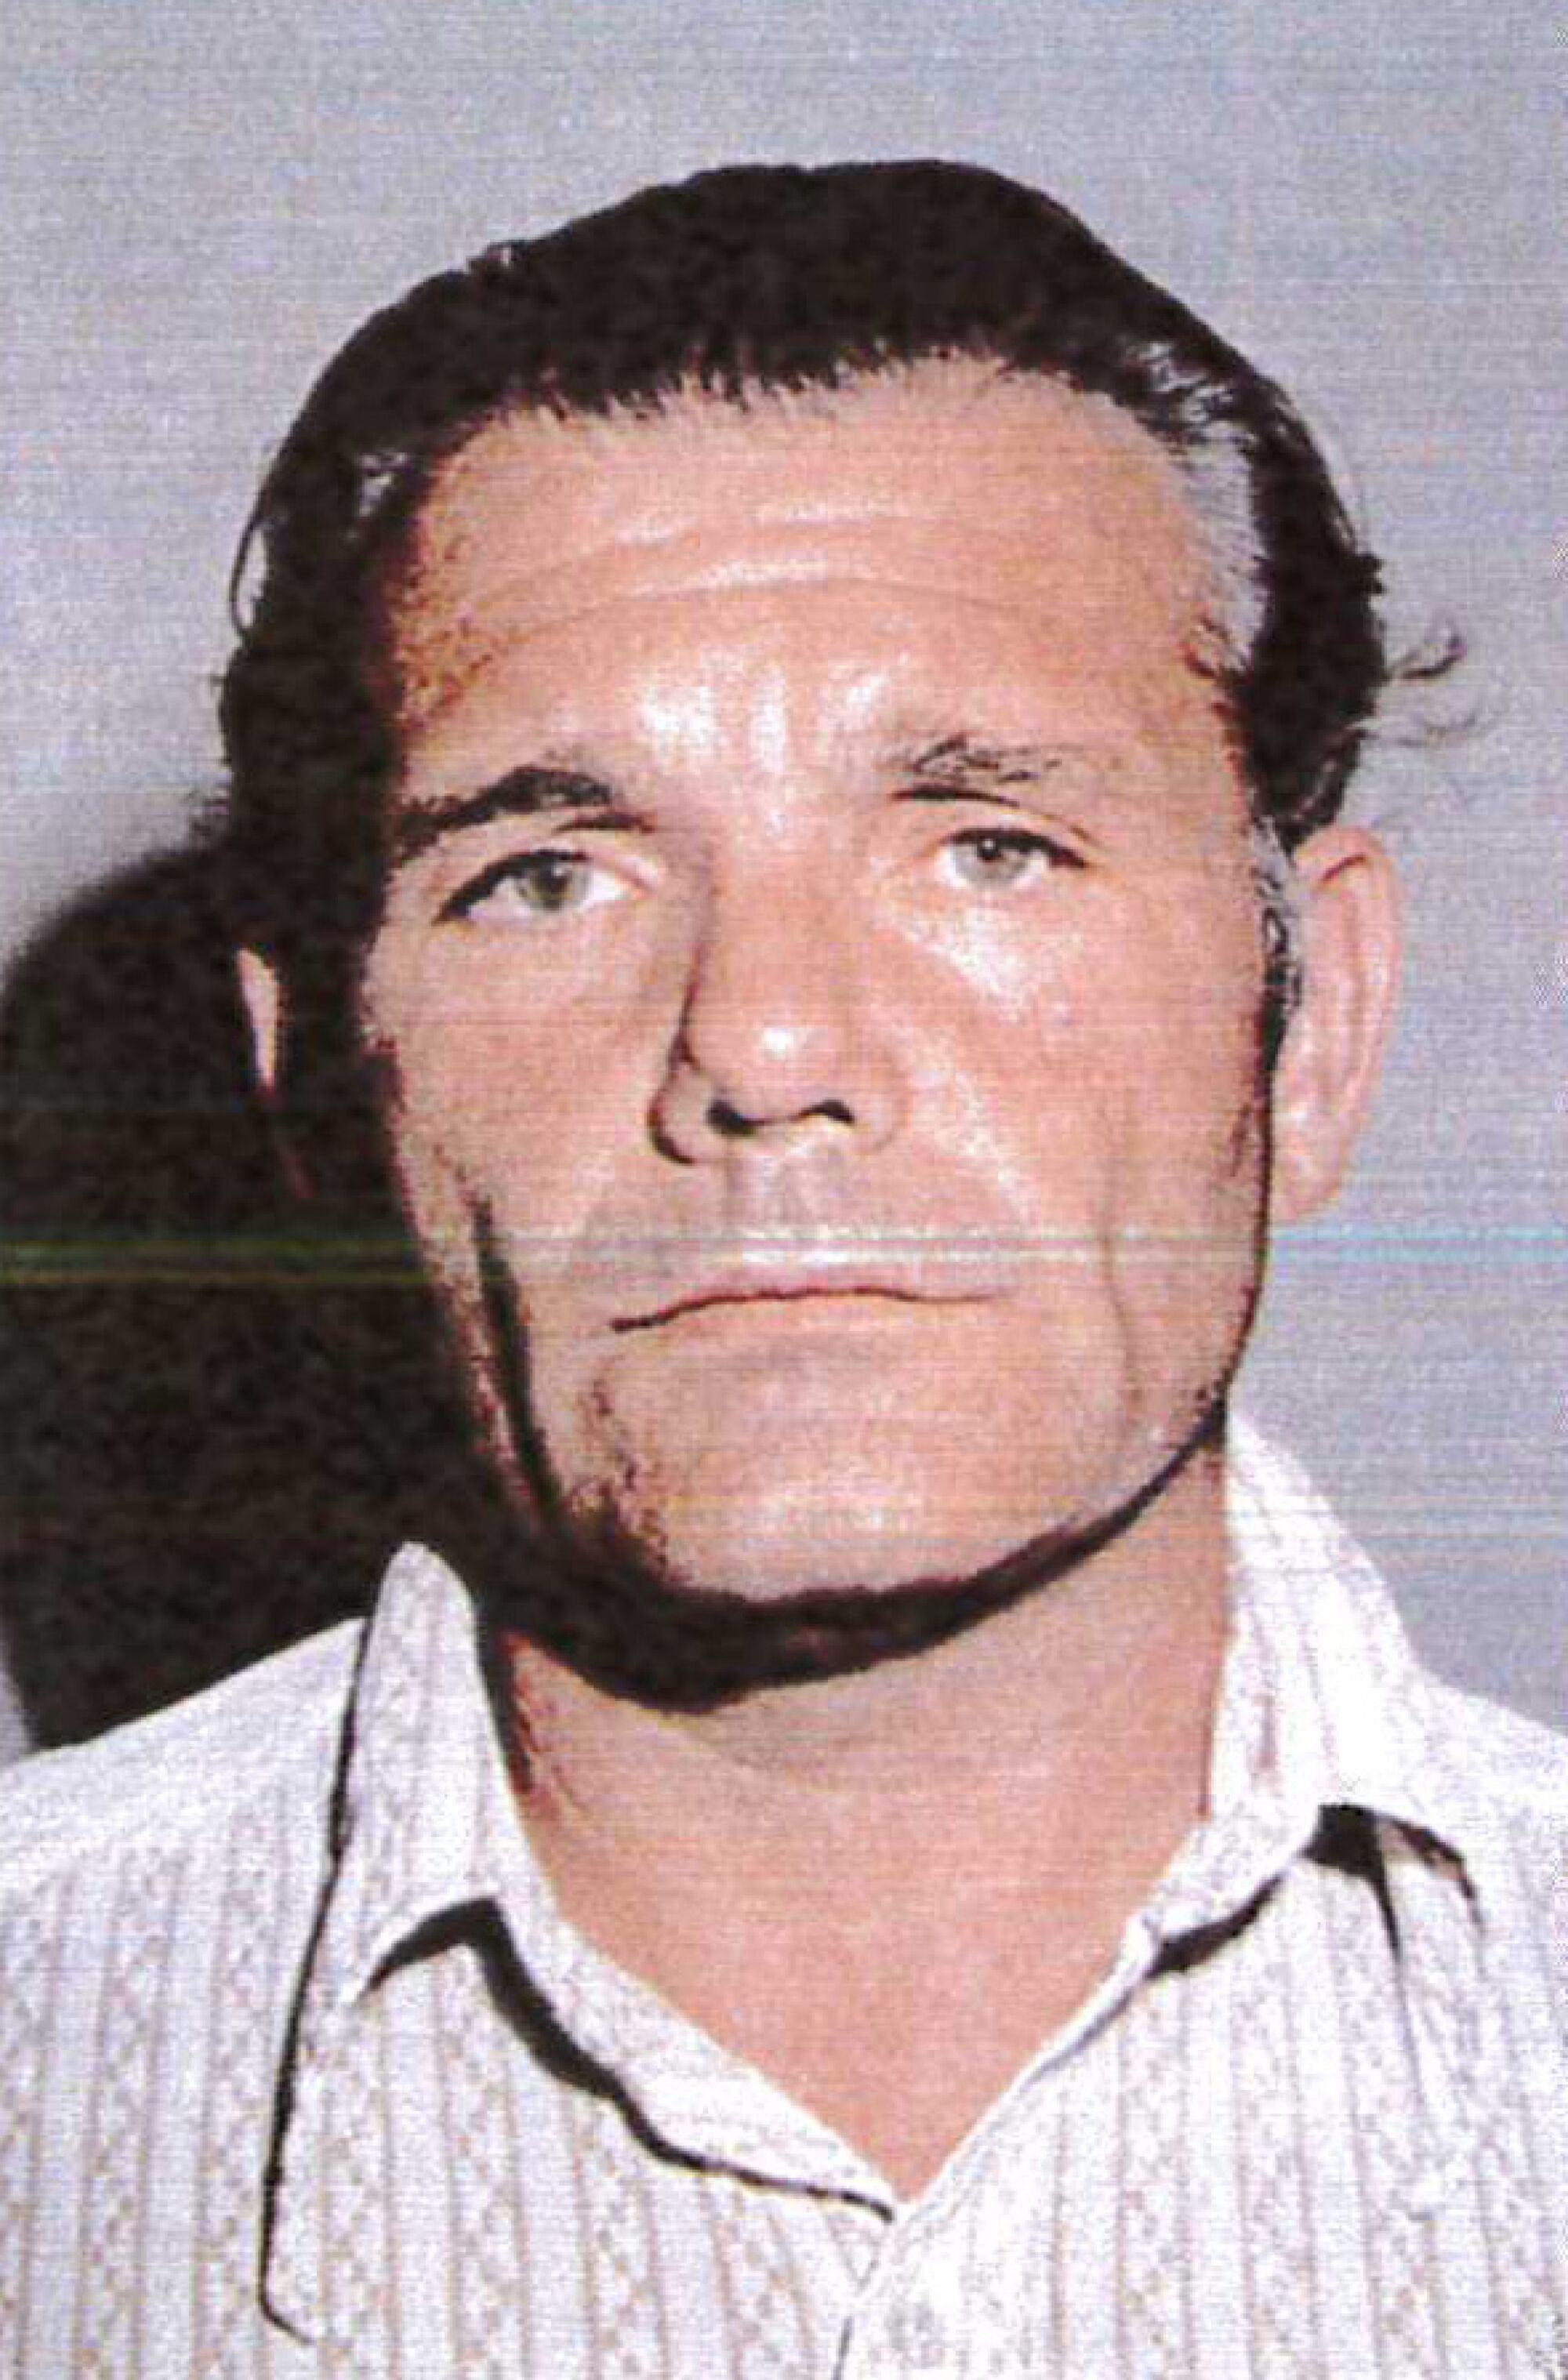 Ronald Tatro, a person of interest related to cold case homicides from the 1980s.